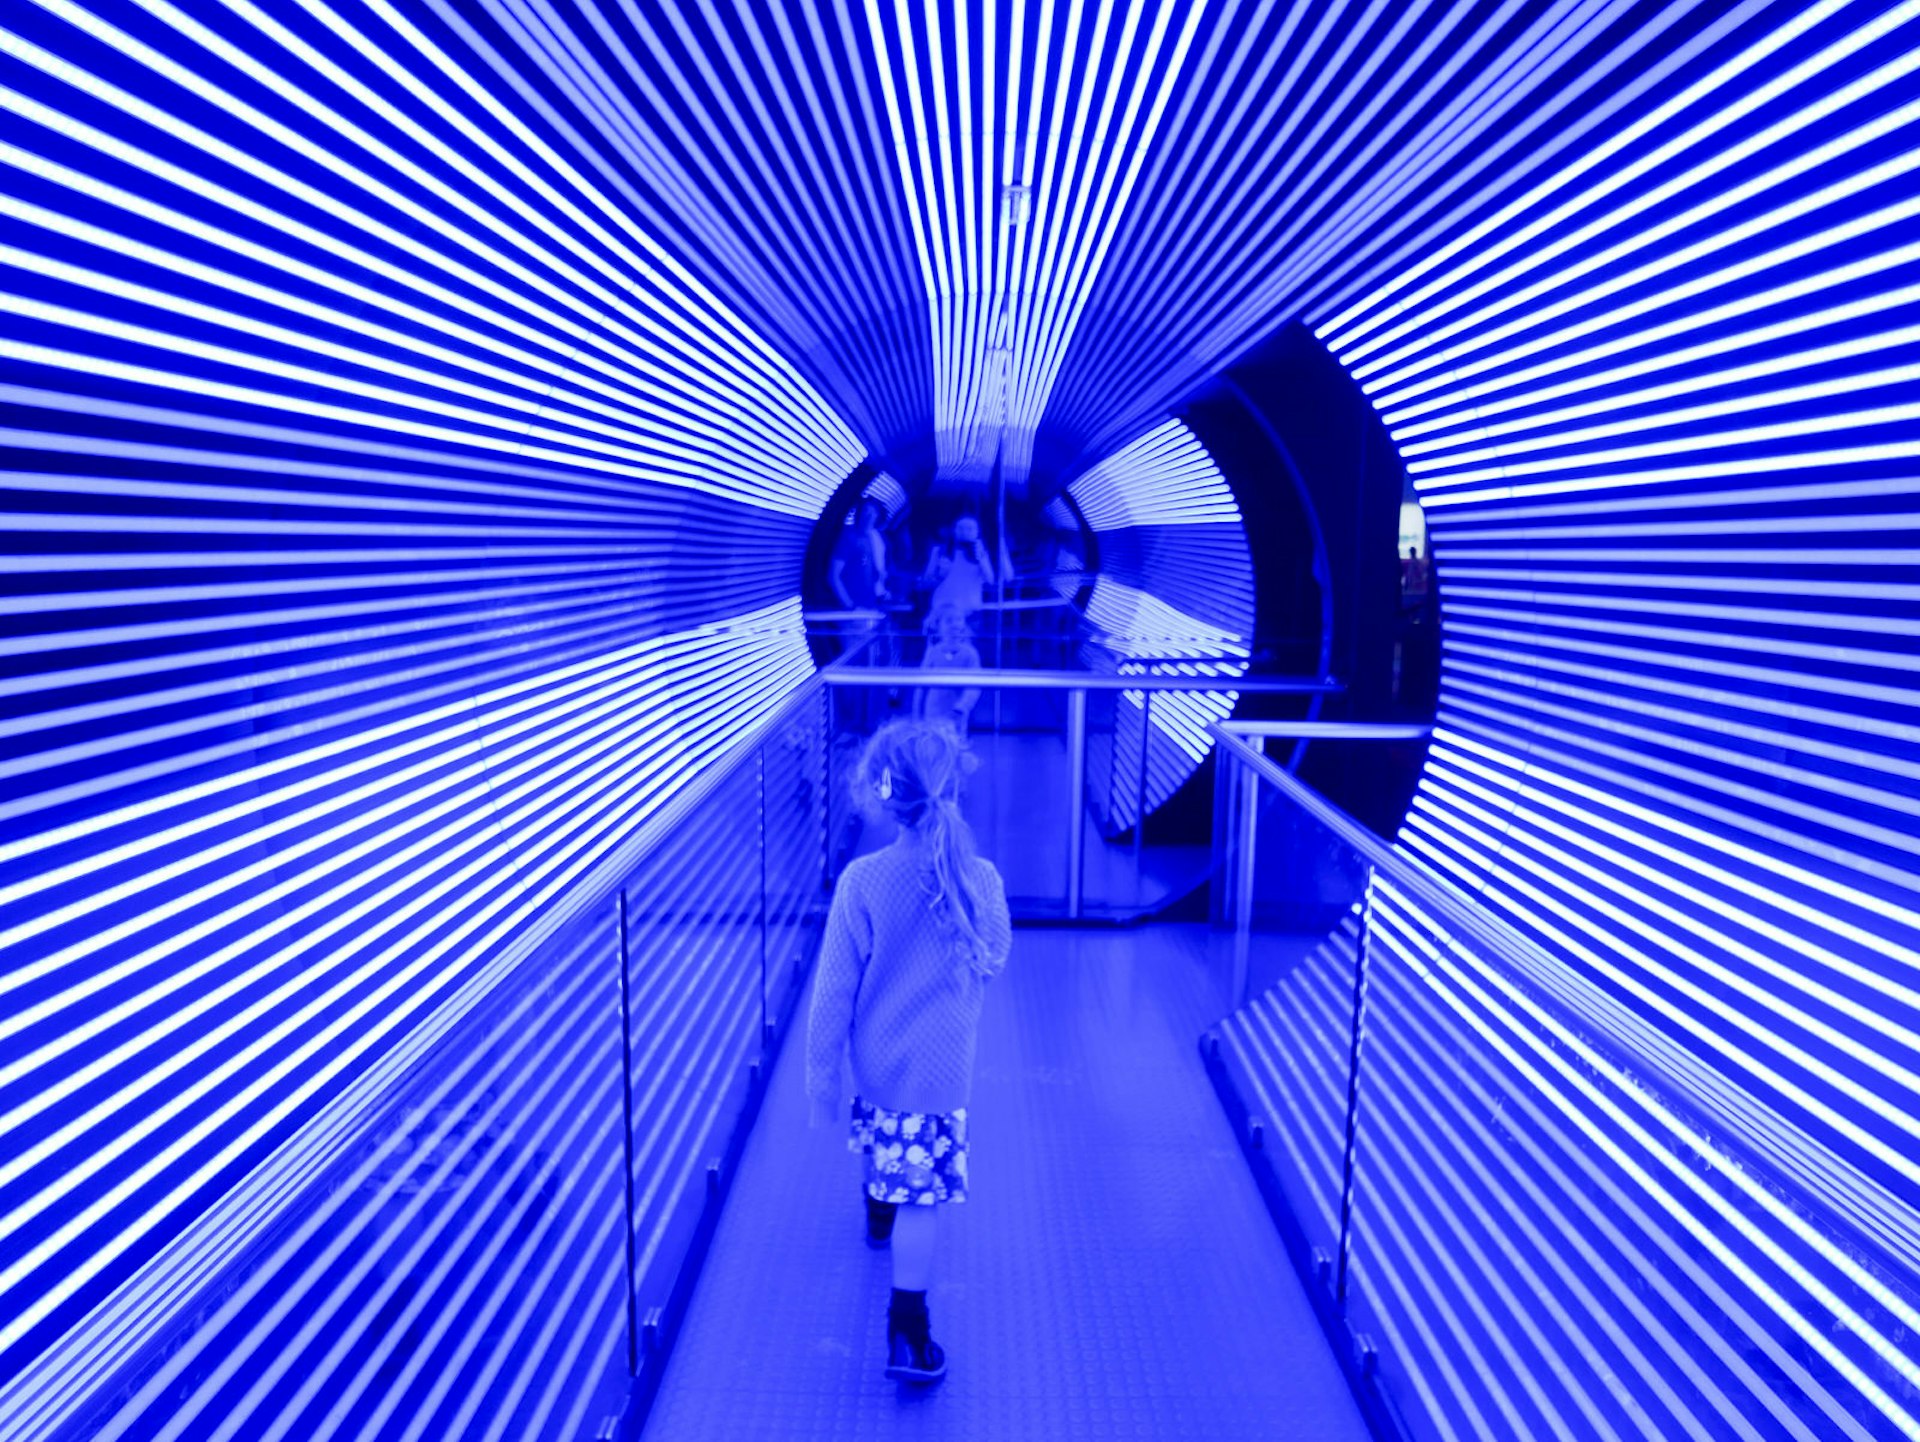 A girl walks through a purple neon tube at Questacon science museum © Christine Knight